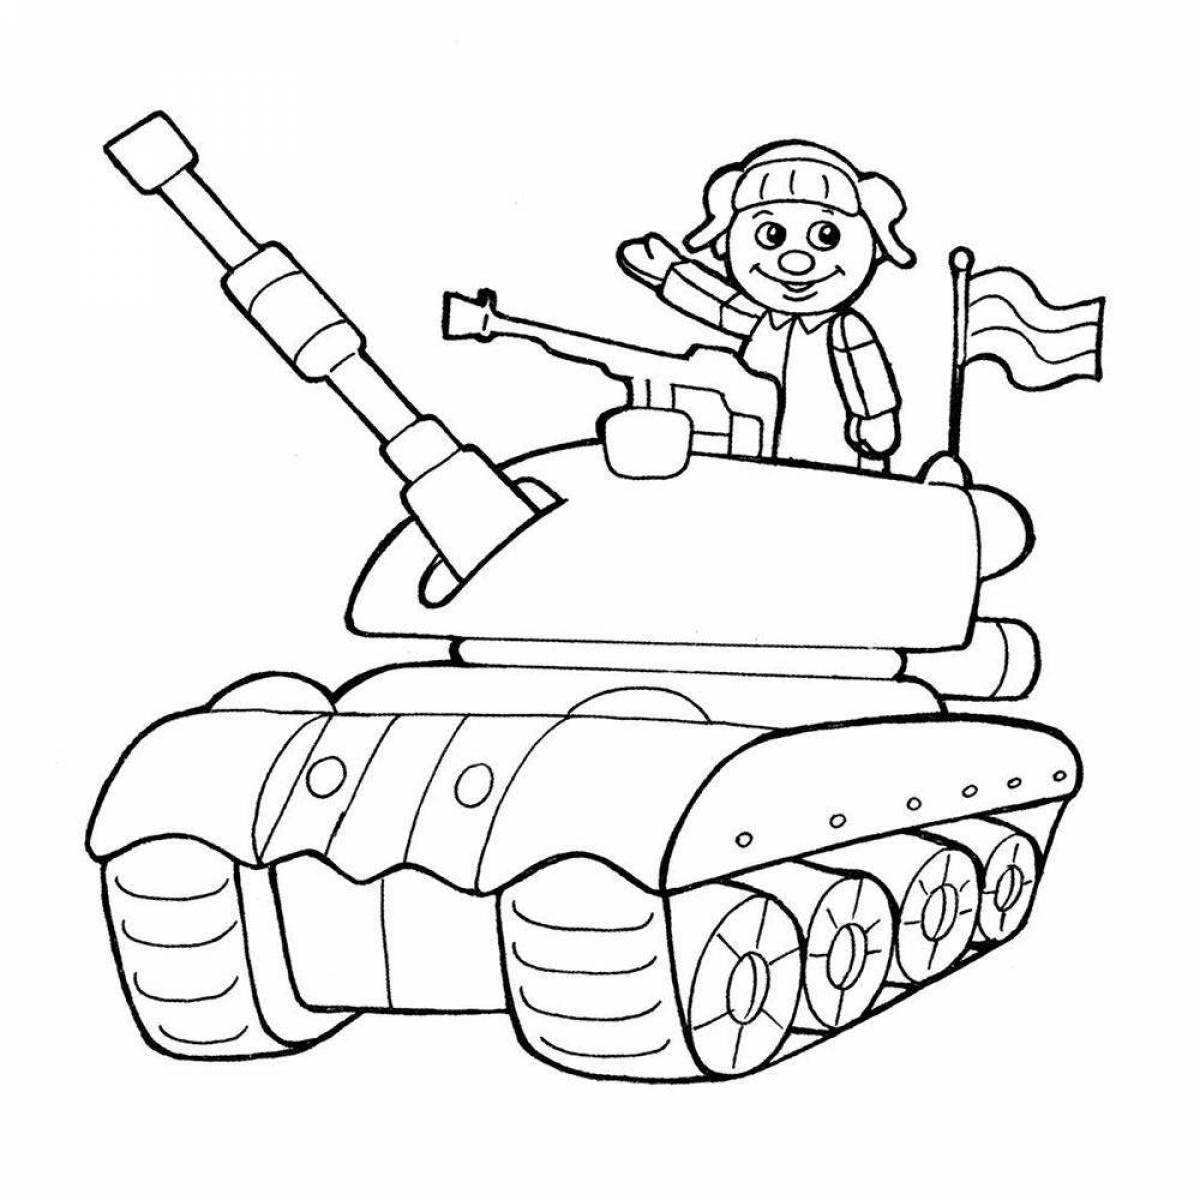 Coloring tank with eyes for a boy